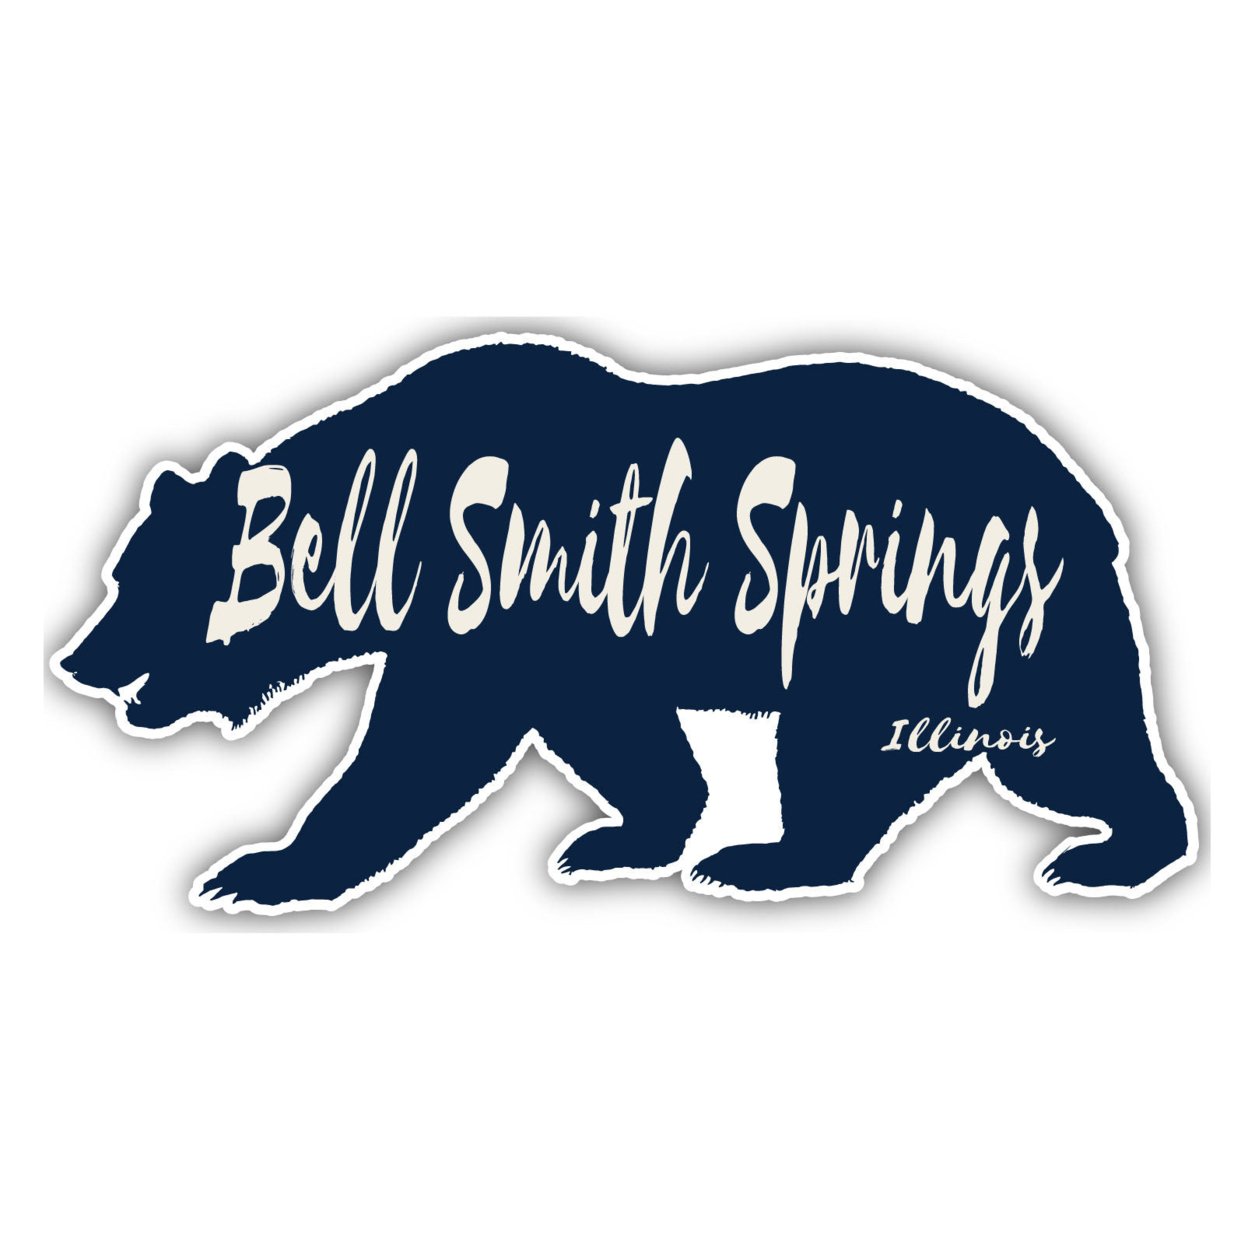 Bell Smith Springs Illinois Souvenir Decorative Stickers (Choose Theme And Size) - Single Unit, 8-Inch, Tent